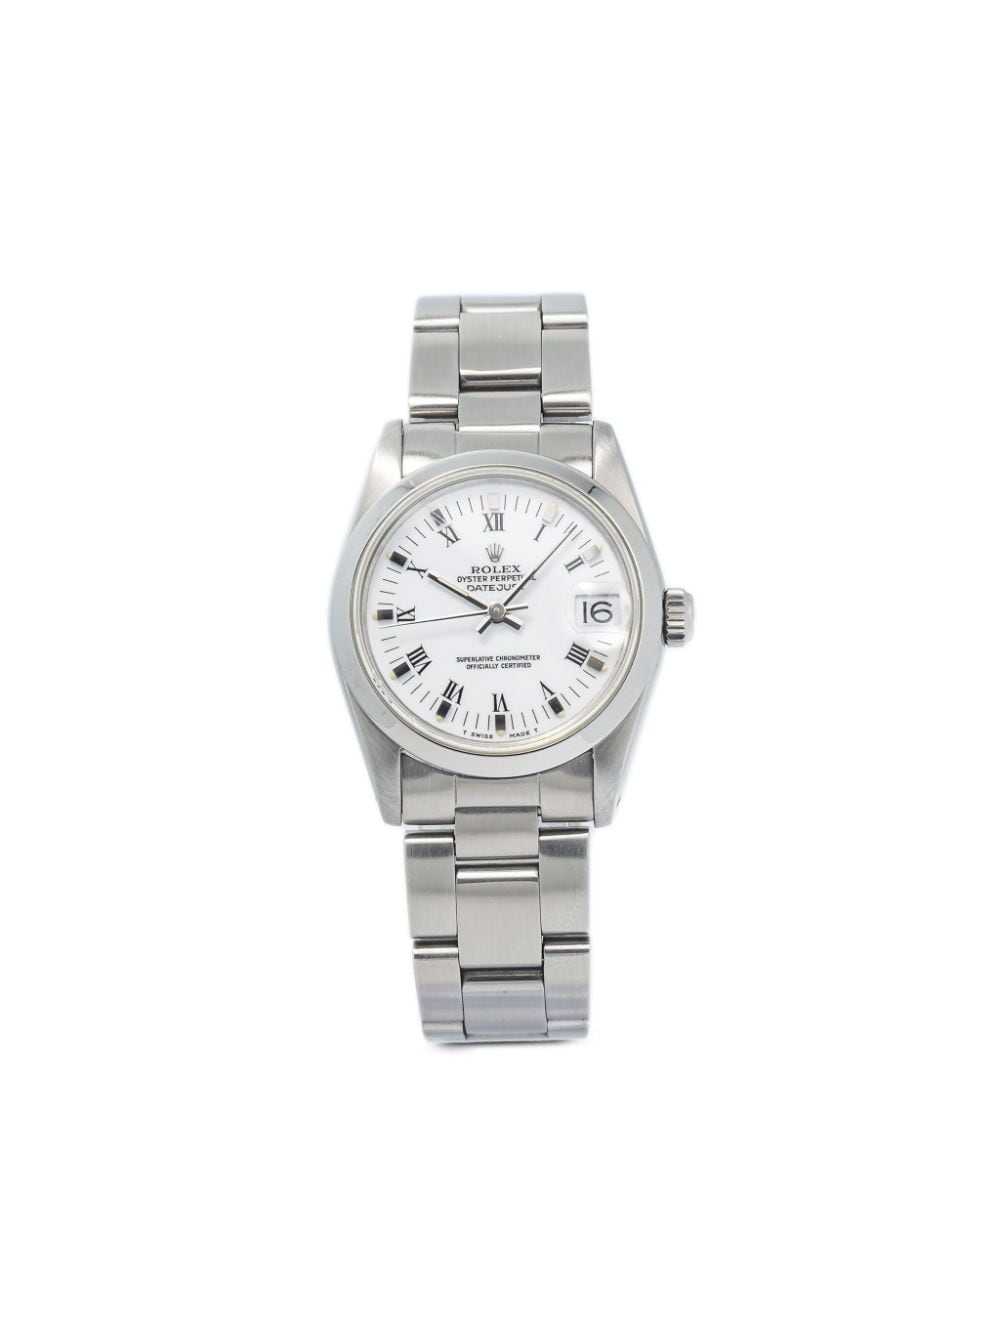 Rolex pre-owned Datejust 30mm - White - image 1